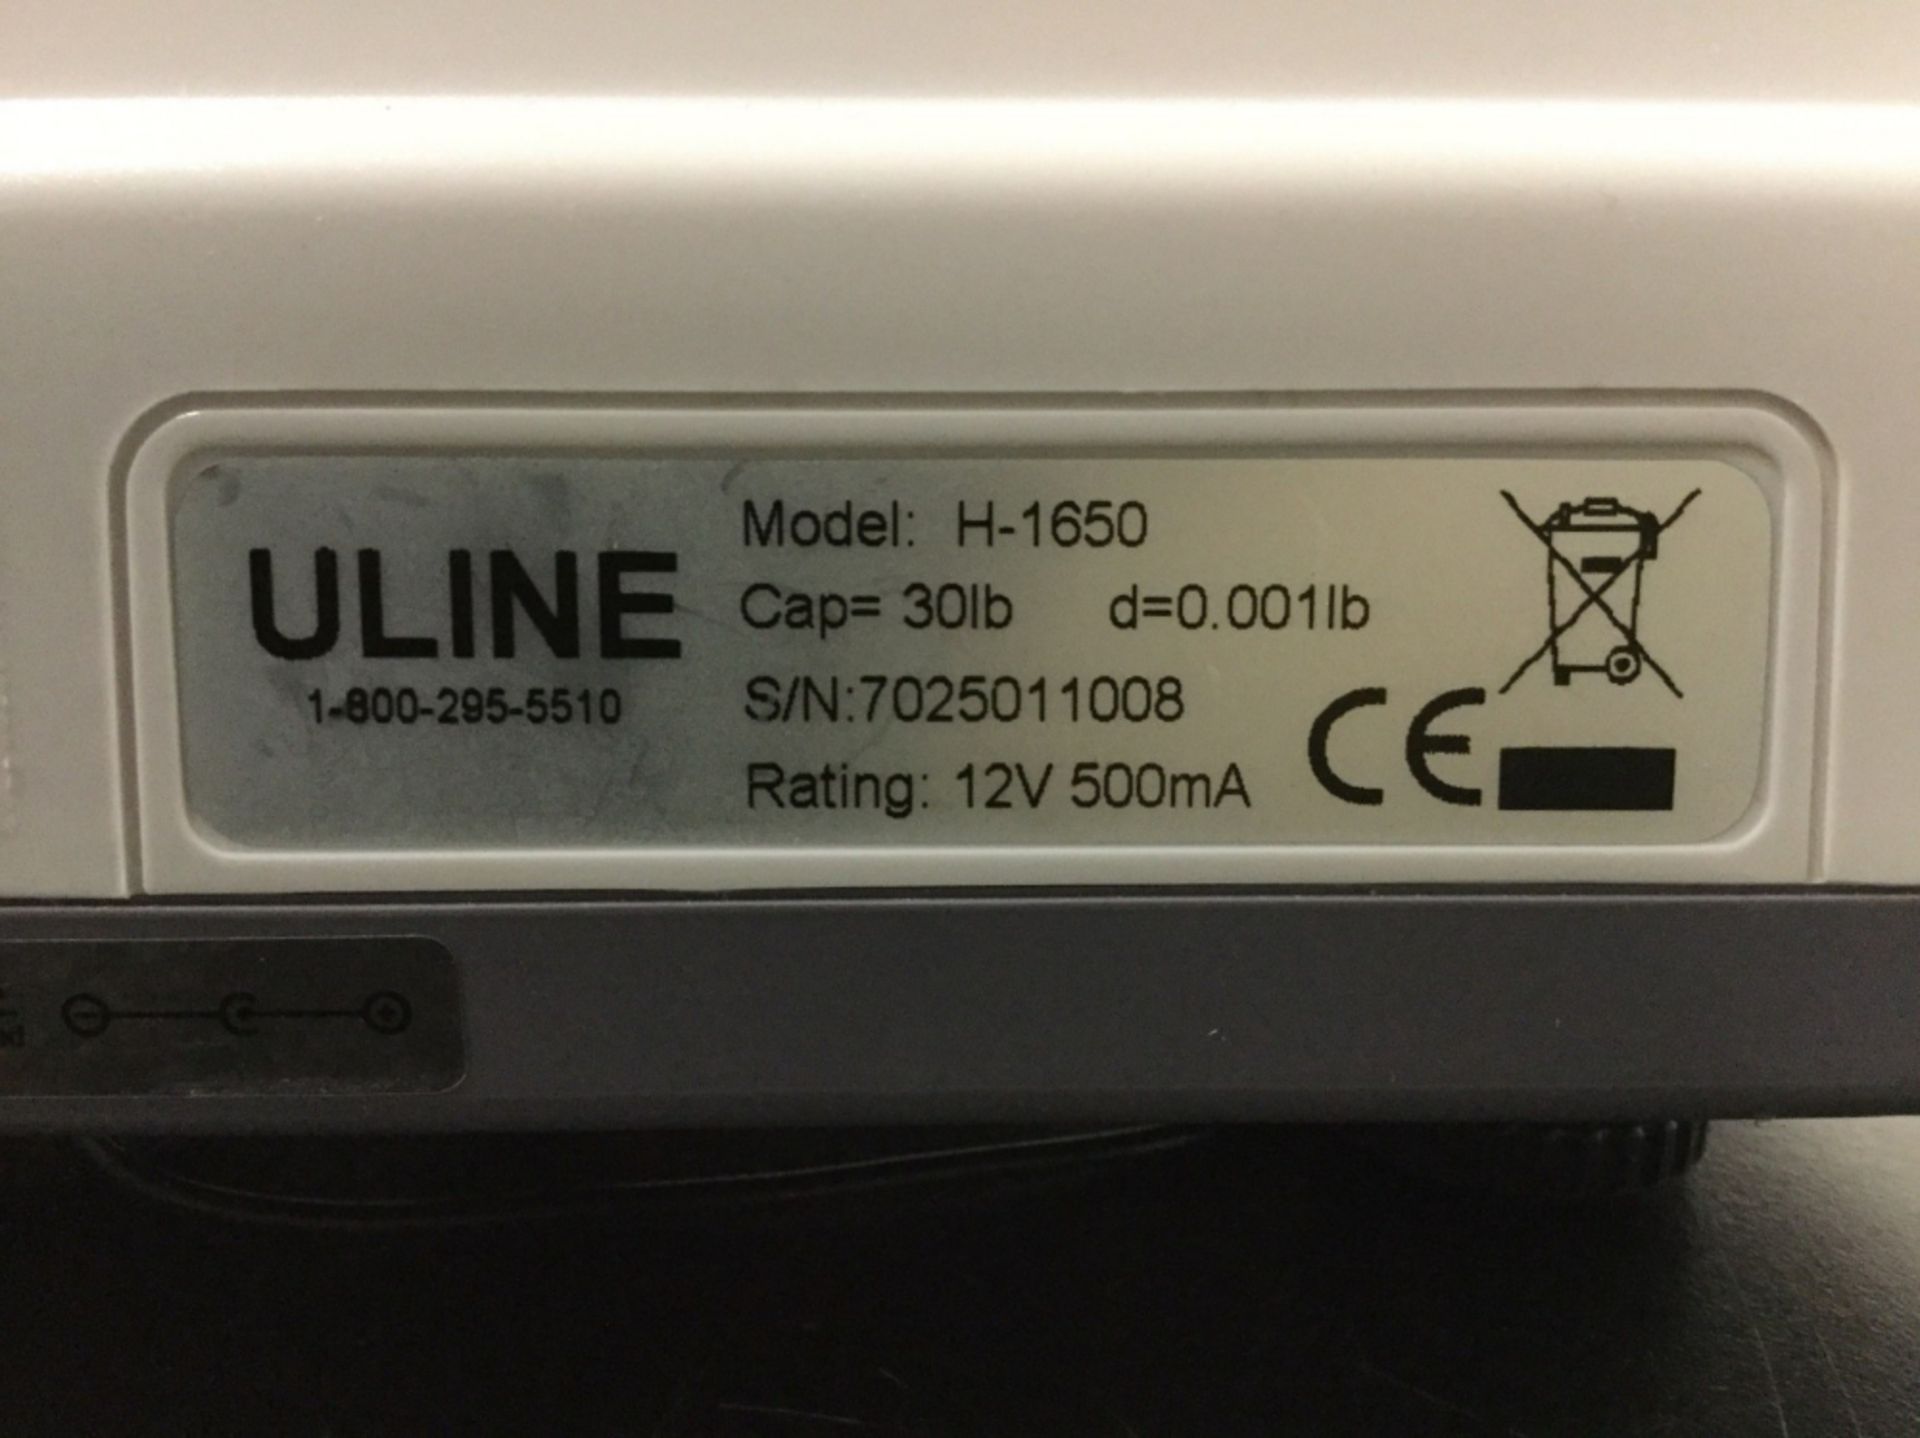 ULINE H-1650 Easy-Count Counting Scale - Image 2 of 2